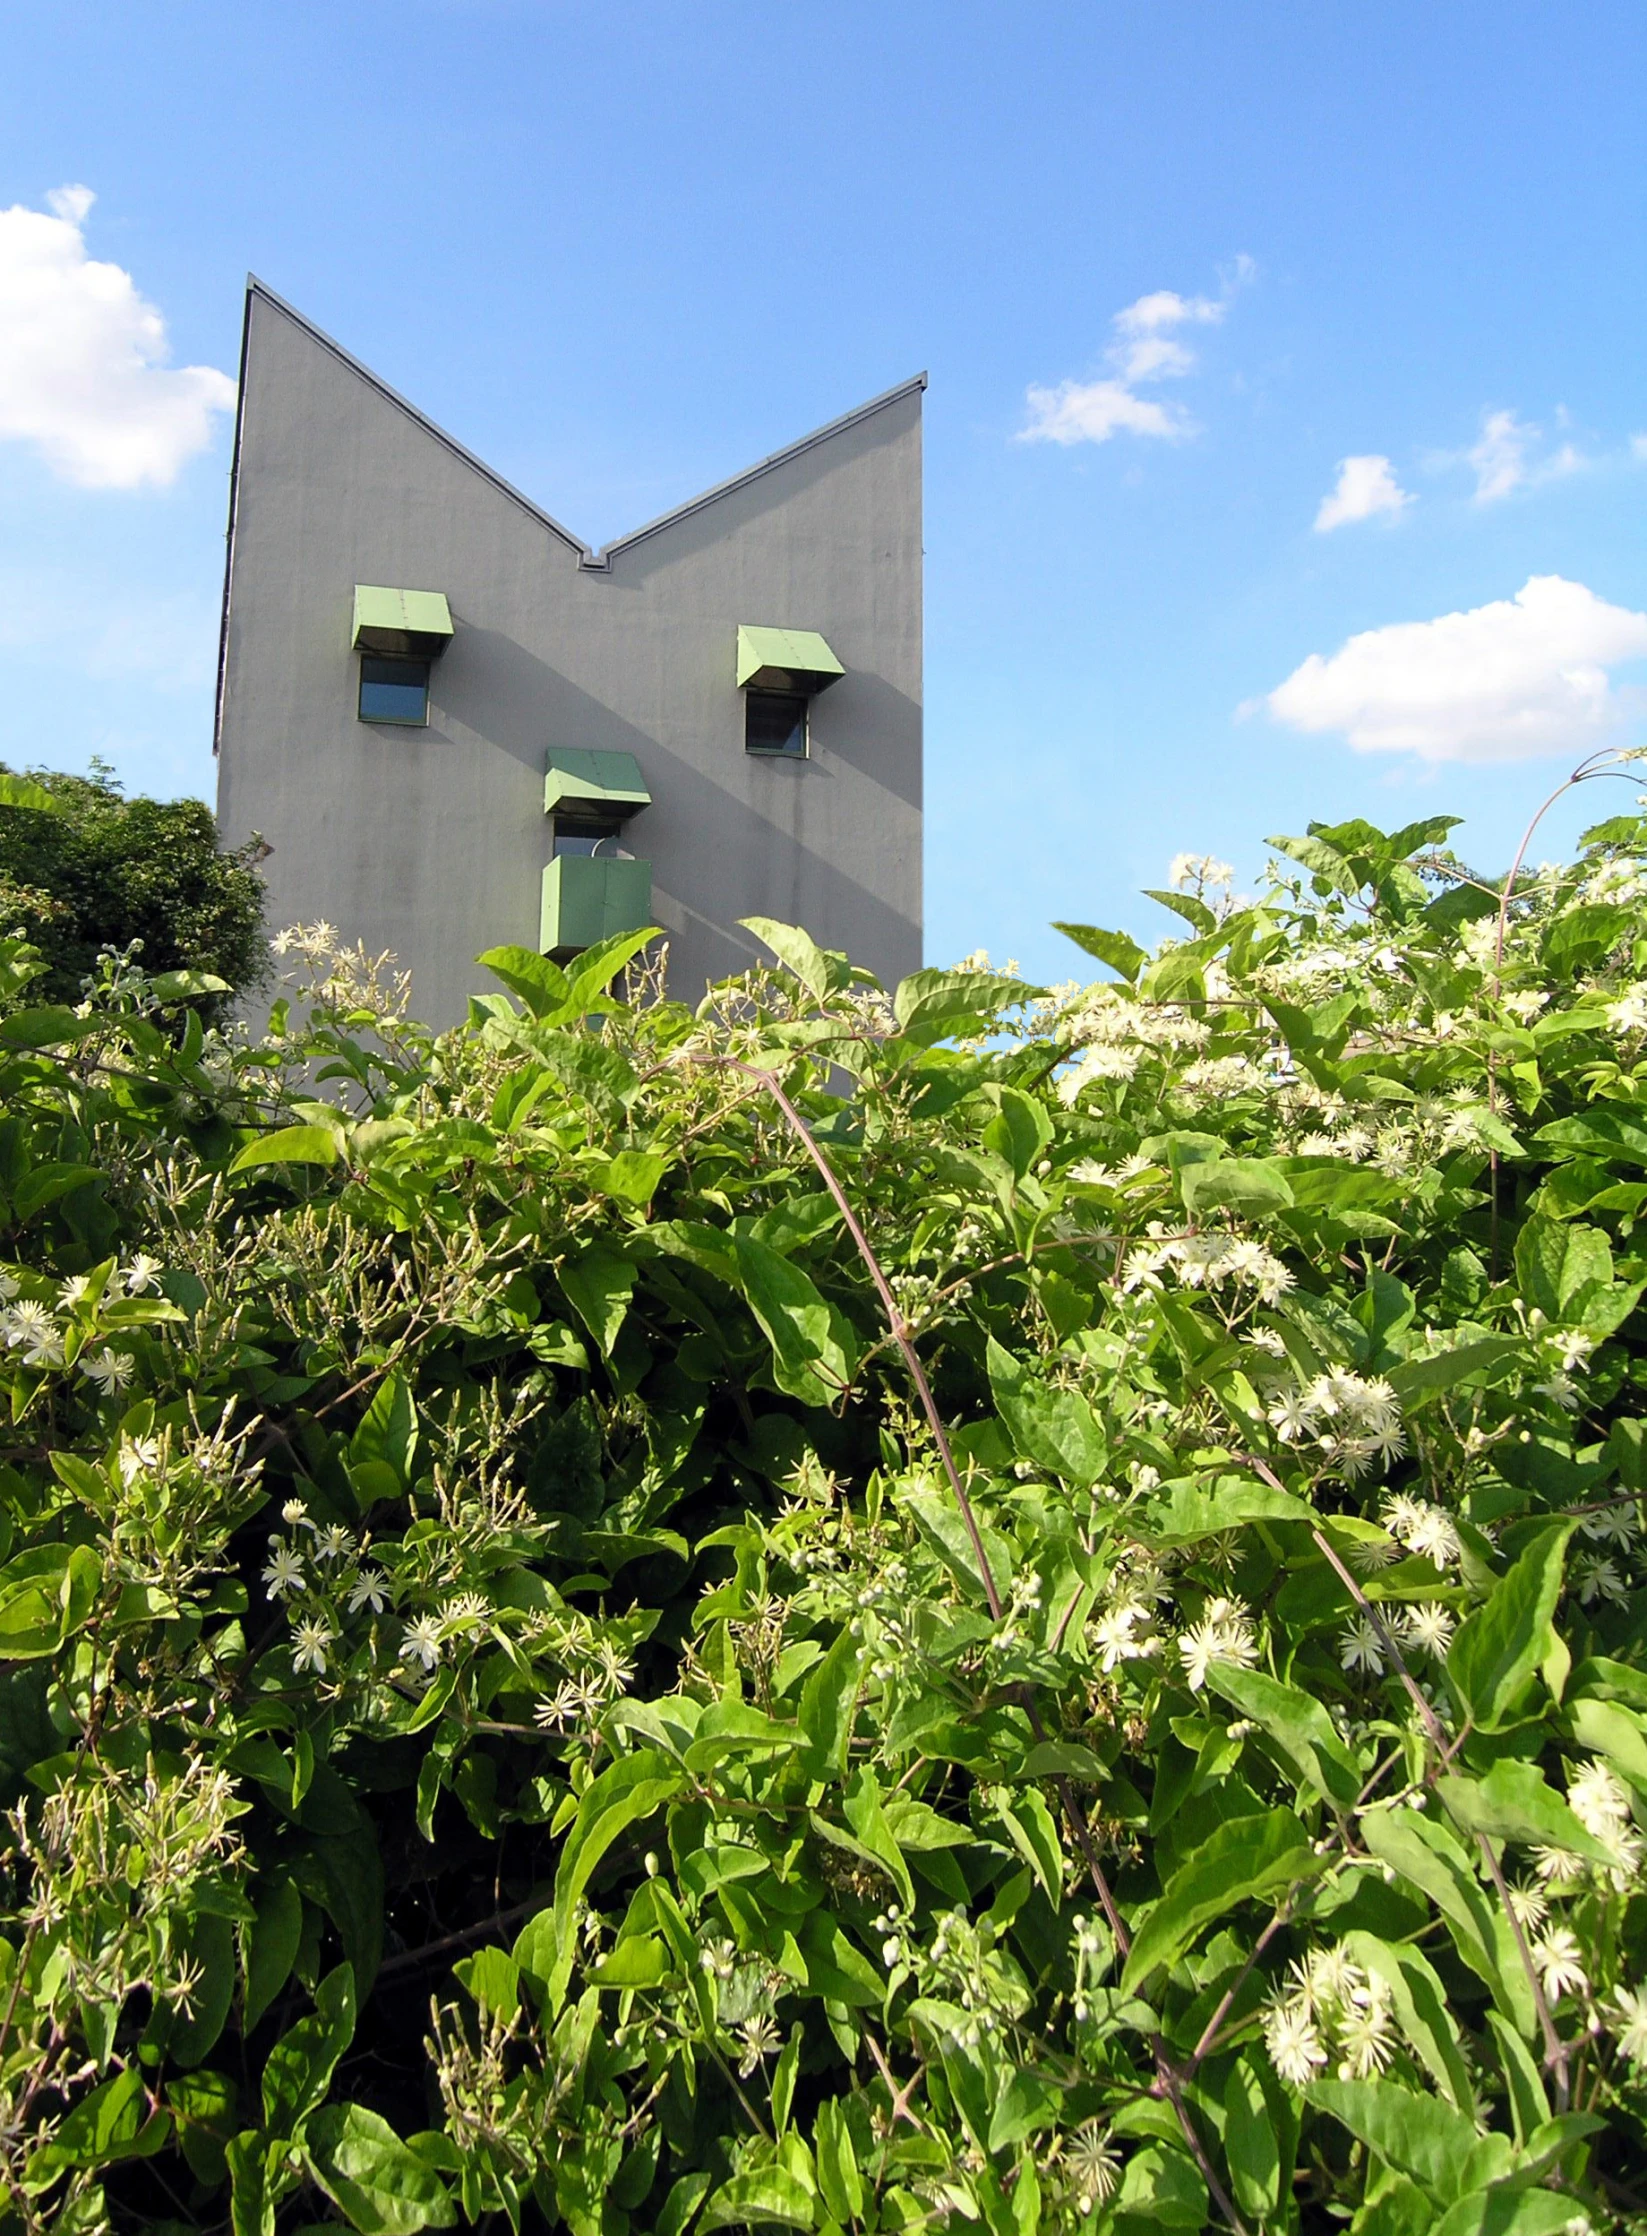 bushes and flowers surrounding a structure on a hill